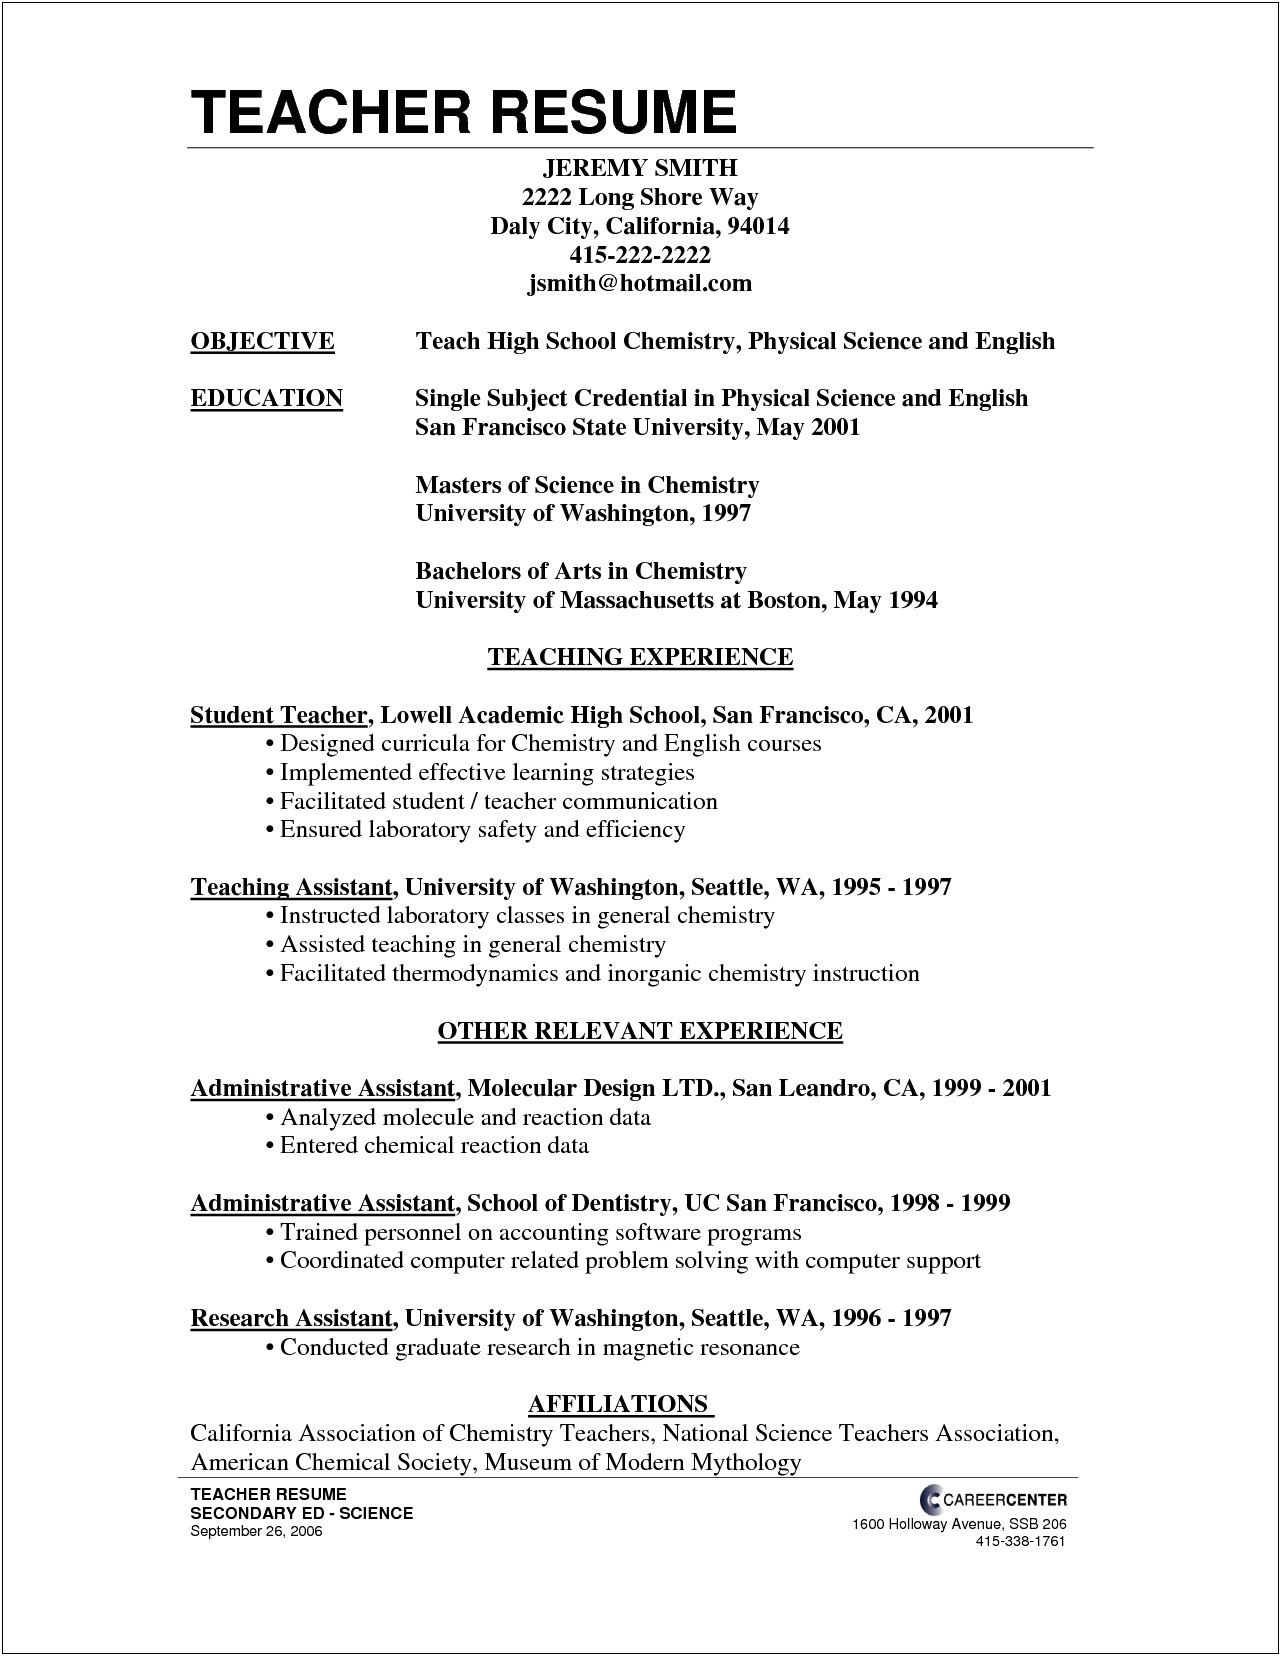 Sample Resume Objectives For It Jobs